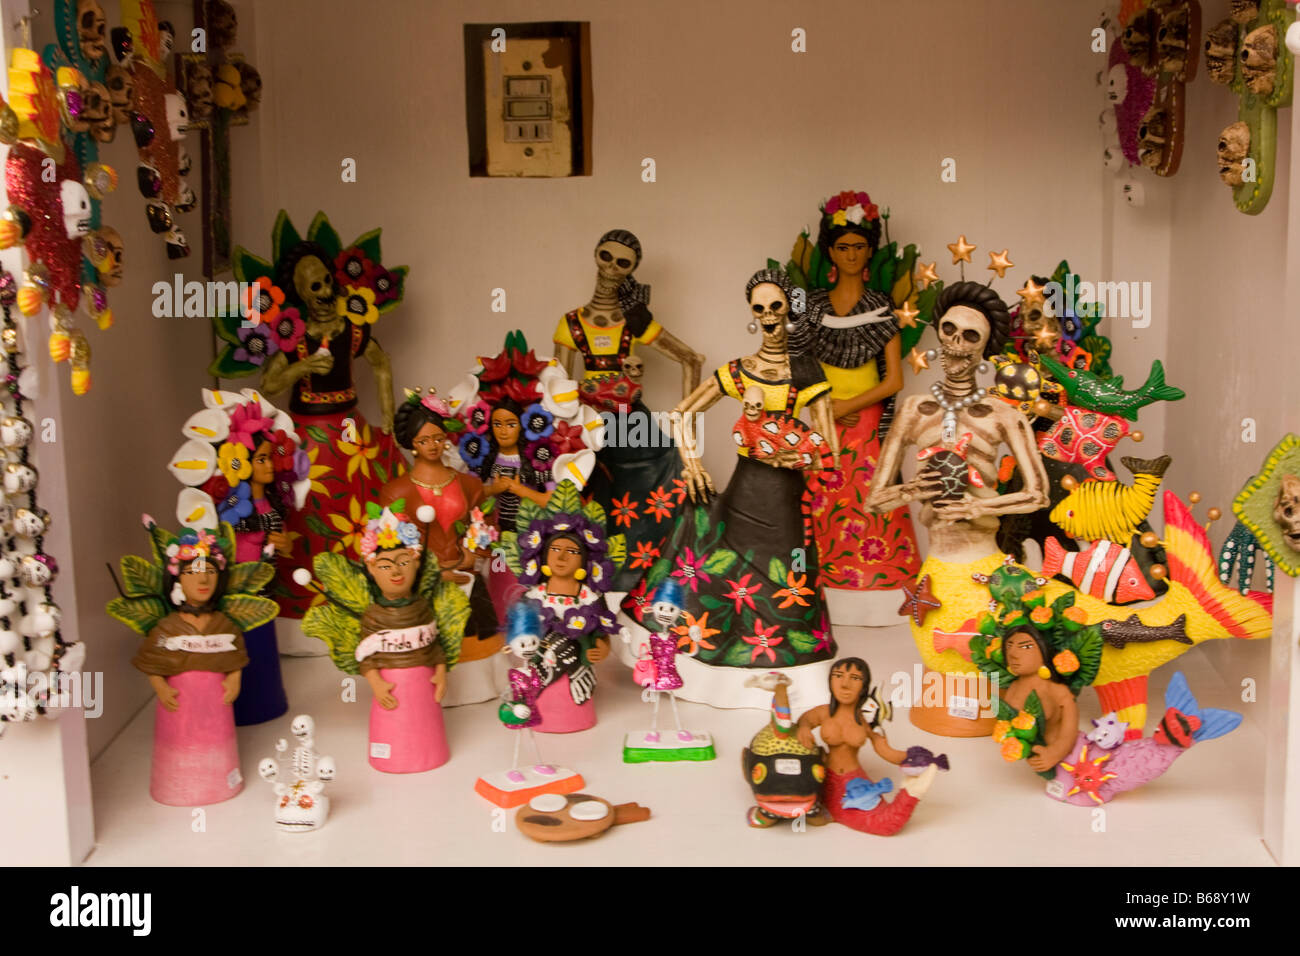 Oaxaca, Mexico. Day of the Dead. Miniature Model Skeleton Dolls for Decorating Home Altars to Honor the Deceased. Stock Photo